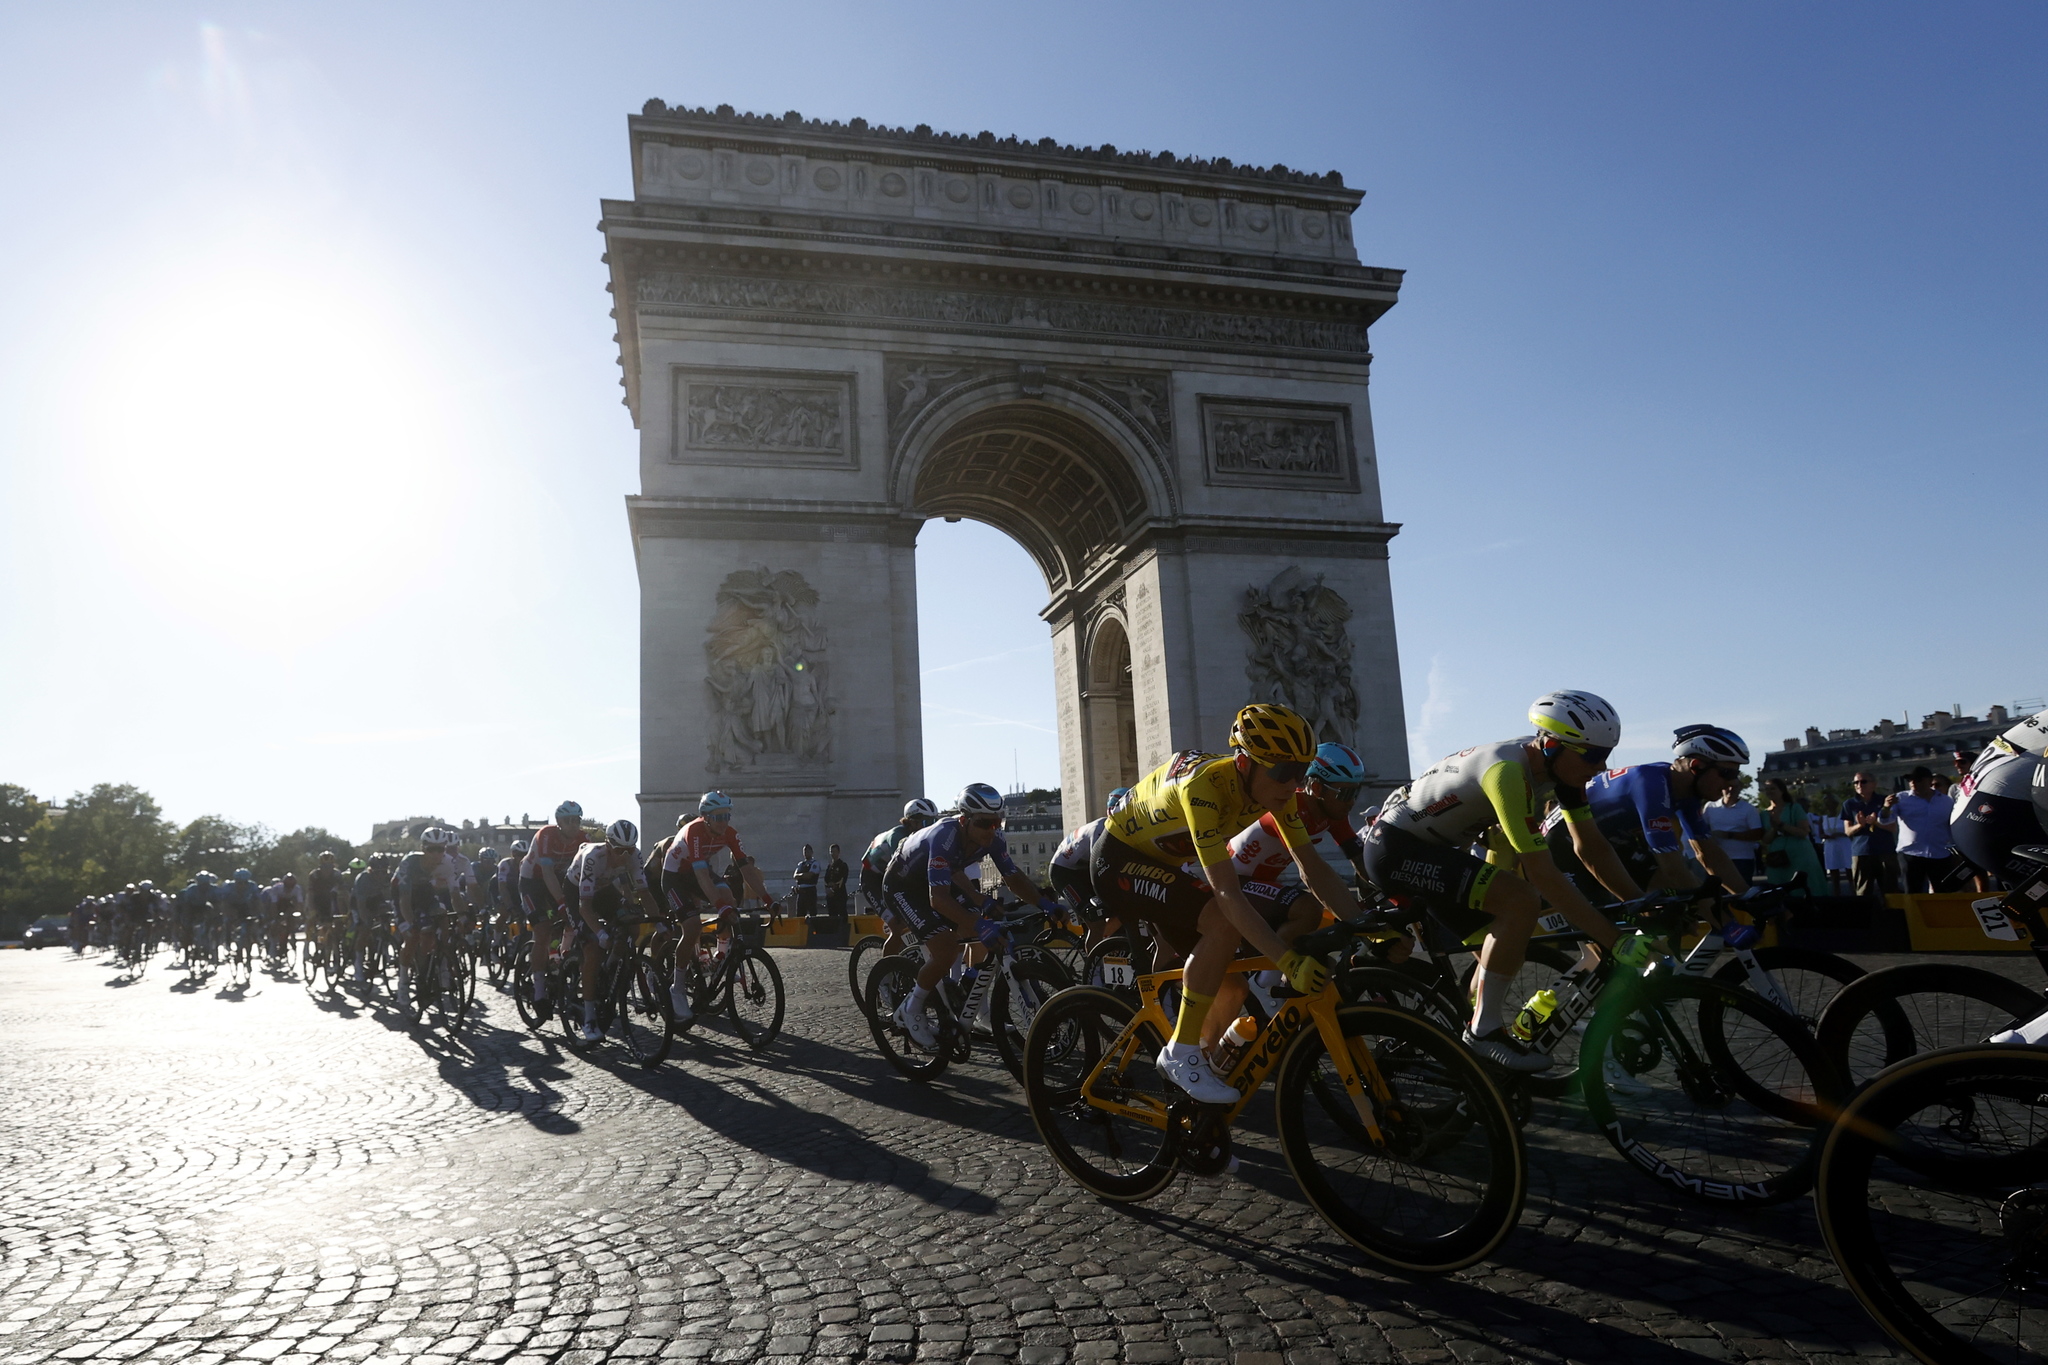 Paris (France), 24/07/2022.- The Yellow Jersey Danish rider Jonas Vingegaard (C-R) of Jumbo Visma rides past the Arc de Triomphe during the 21st stage of the  lt;HIT gt;Tour lt;/HIT gt; de France 2022 over 115.6km from Paris La Defense in the Paris suburb of Nanterre to the Champs-Elysees in Paris, France, 24 July 2022. (Ciclismo, Francia) EFE/EPA/GUILLAUME HORCAJUELO